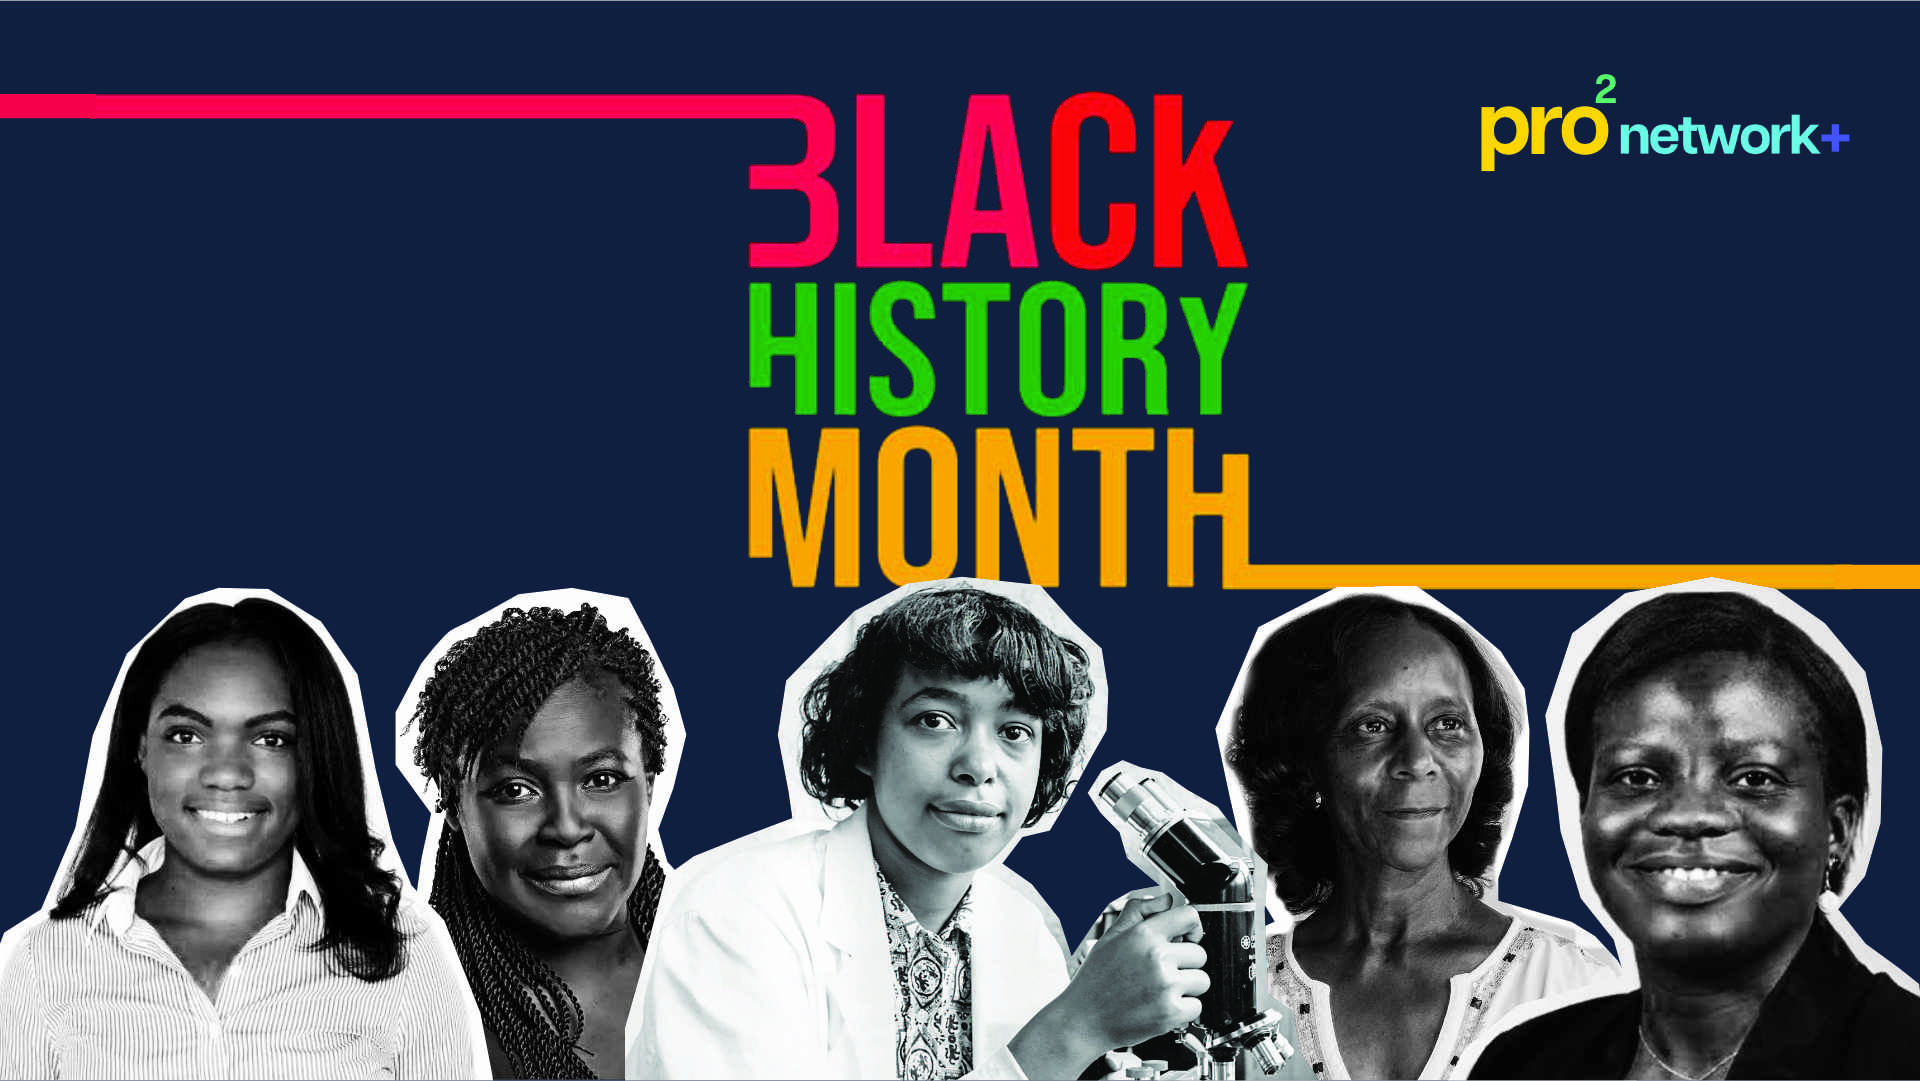 A banner image with the text Black History Month and the prosquared logo, along the bottom are five profile images of Black women innovators.